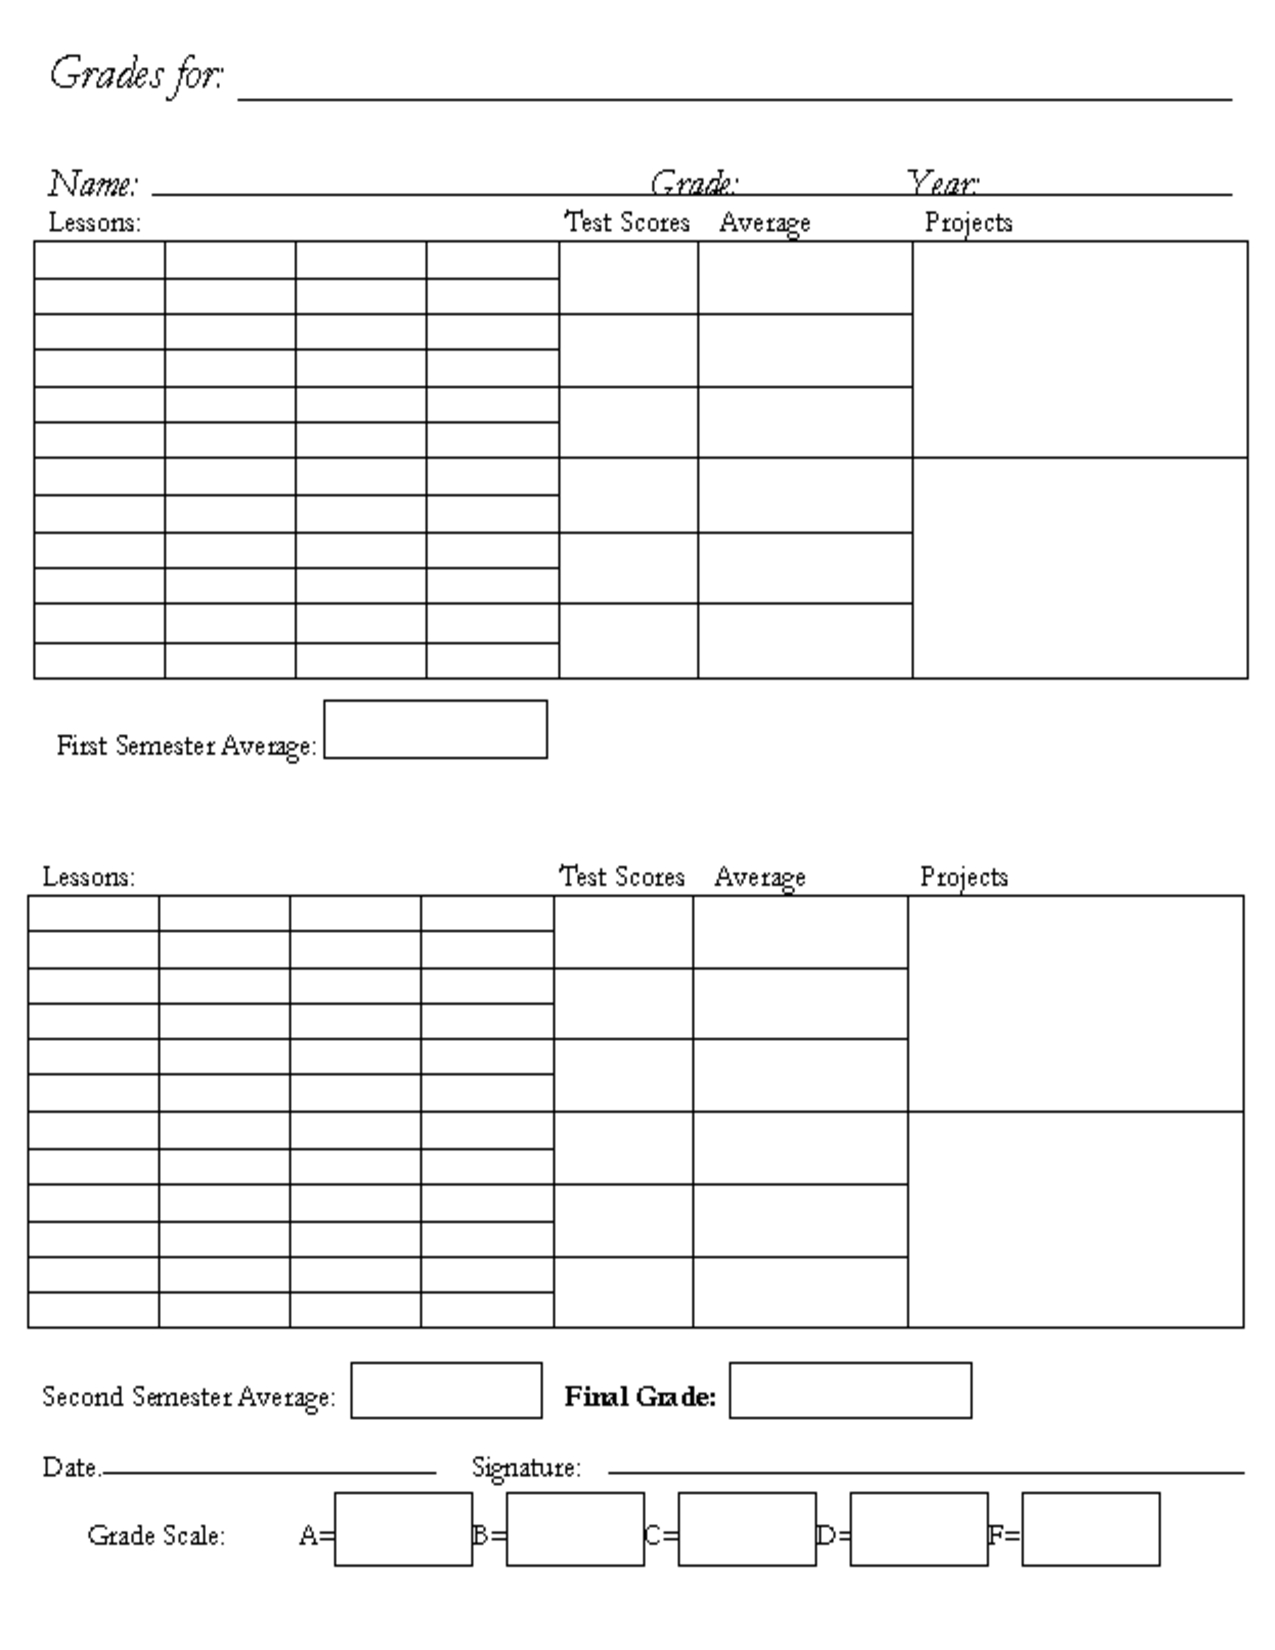 Homeschool Report Card Emplate Free Printable Sample Forms With Middle School Report Card Template